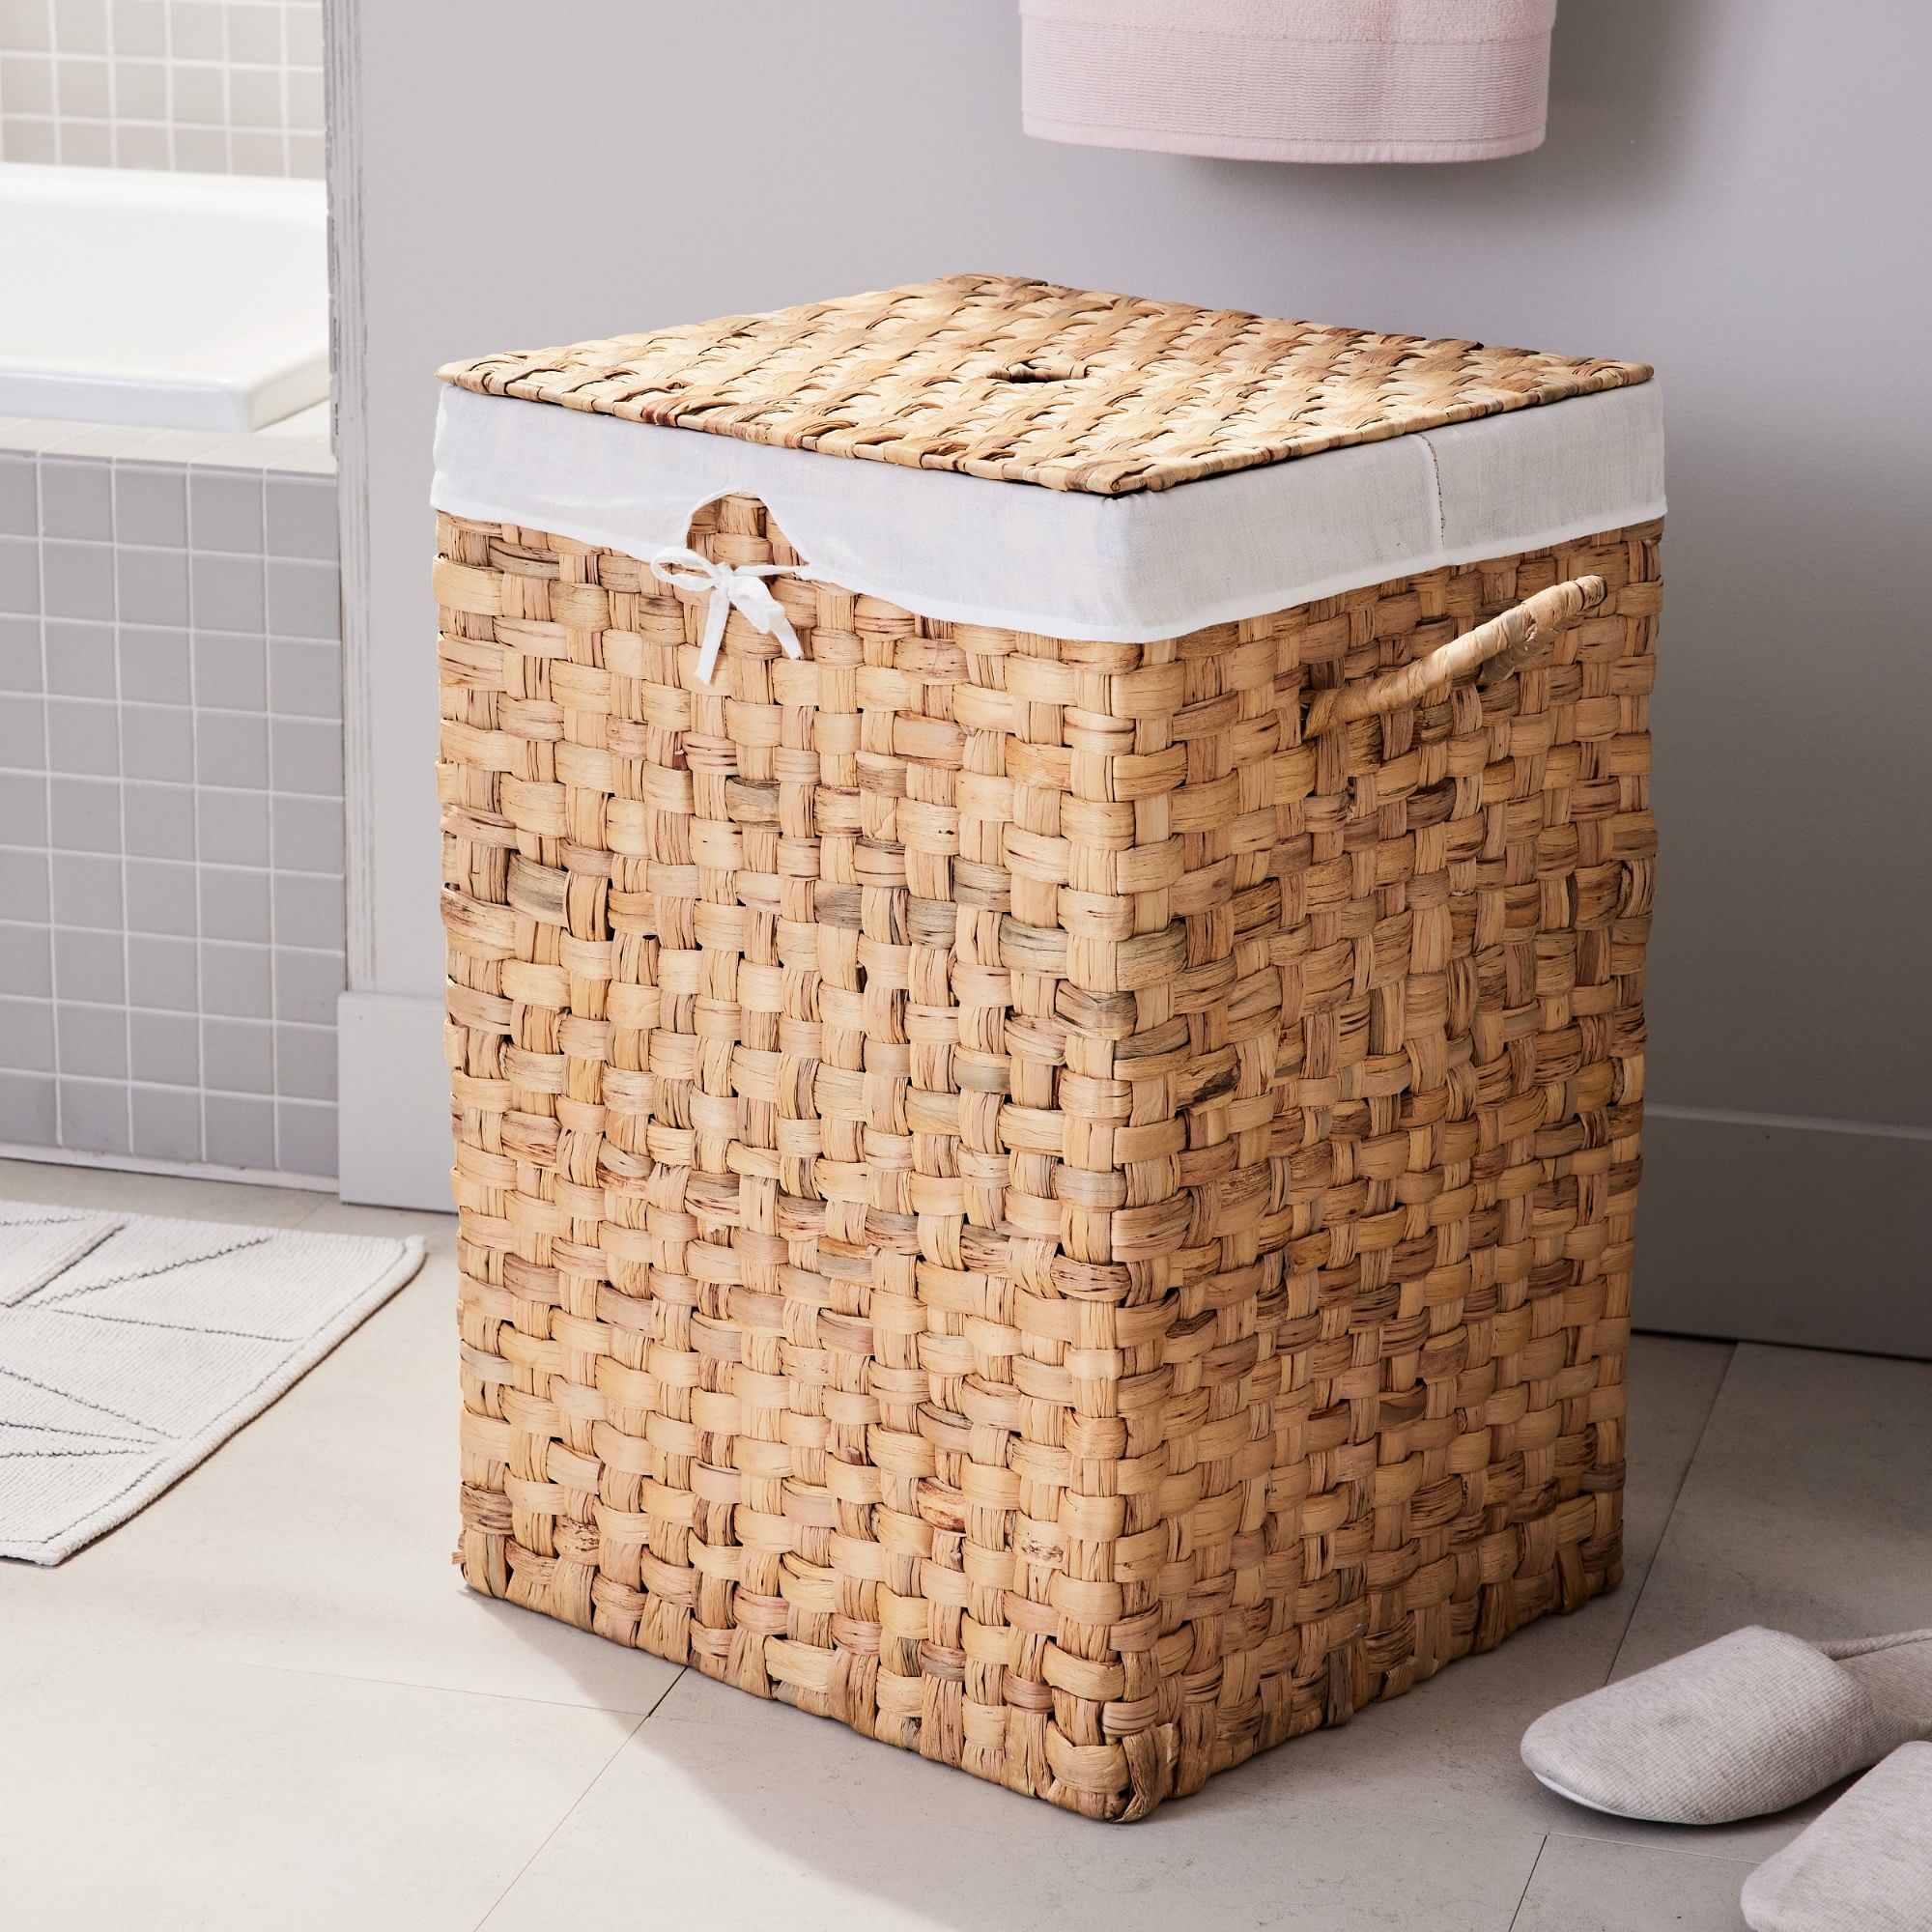 Rounded Weave Rattan Hampers | West Elm